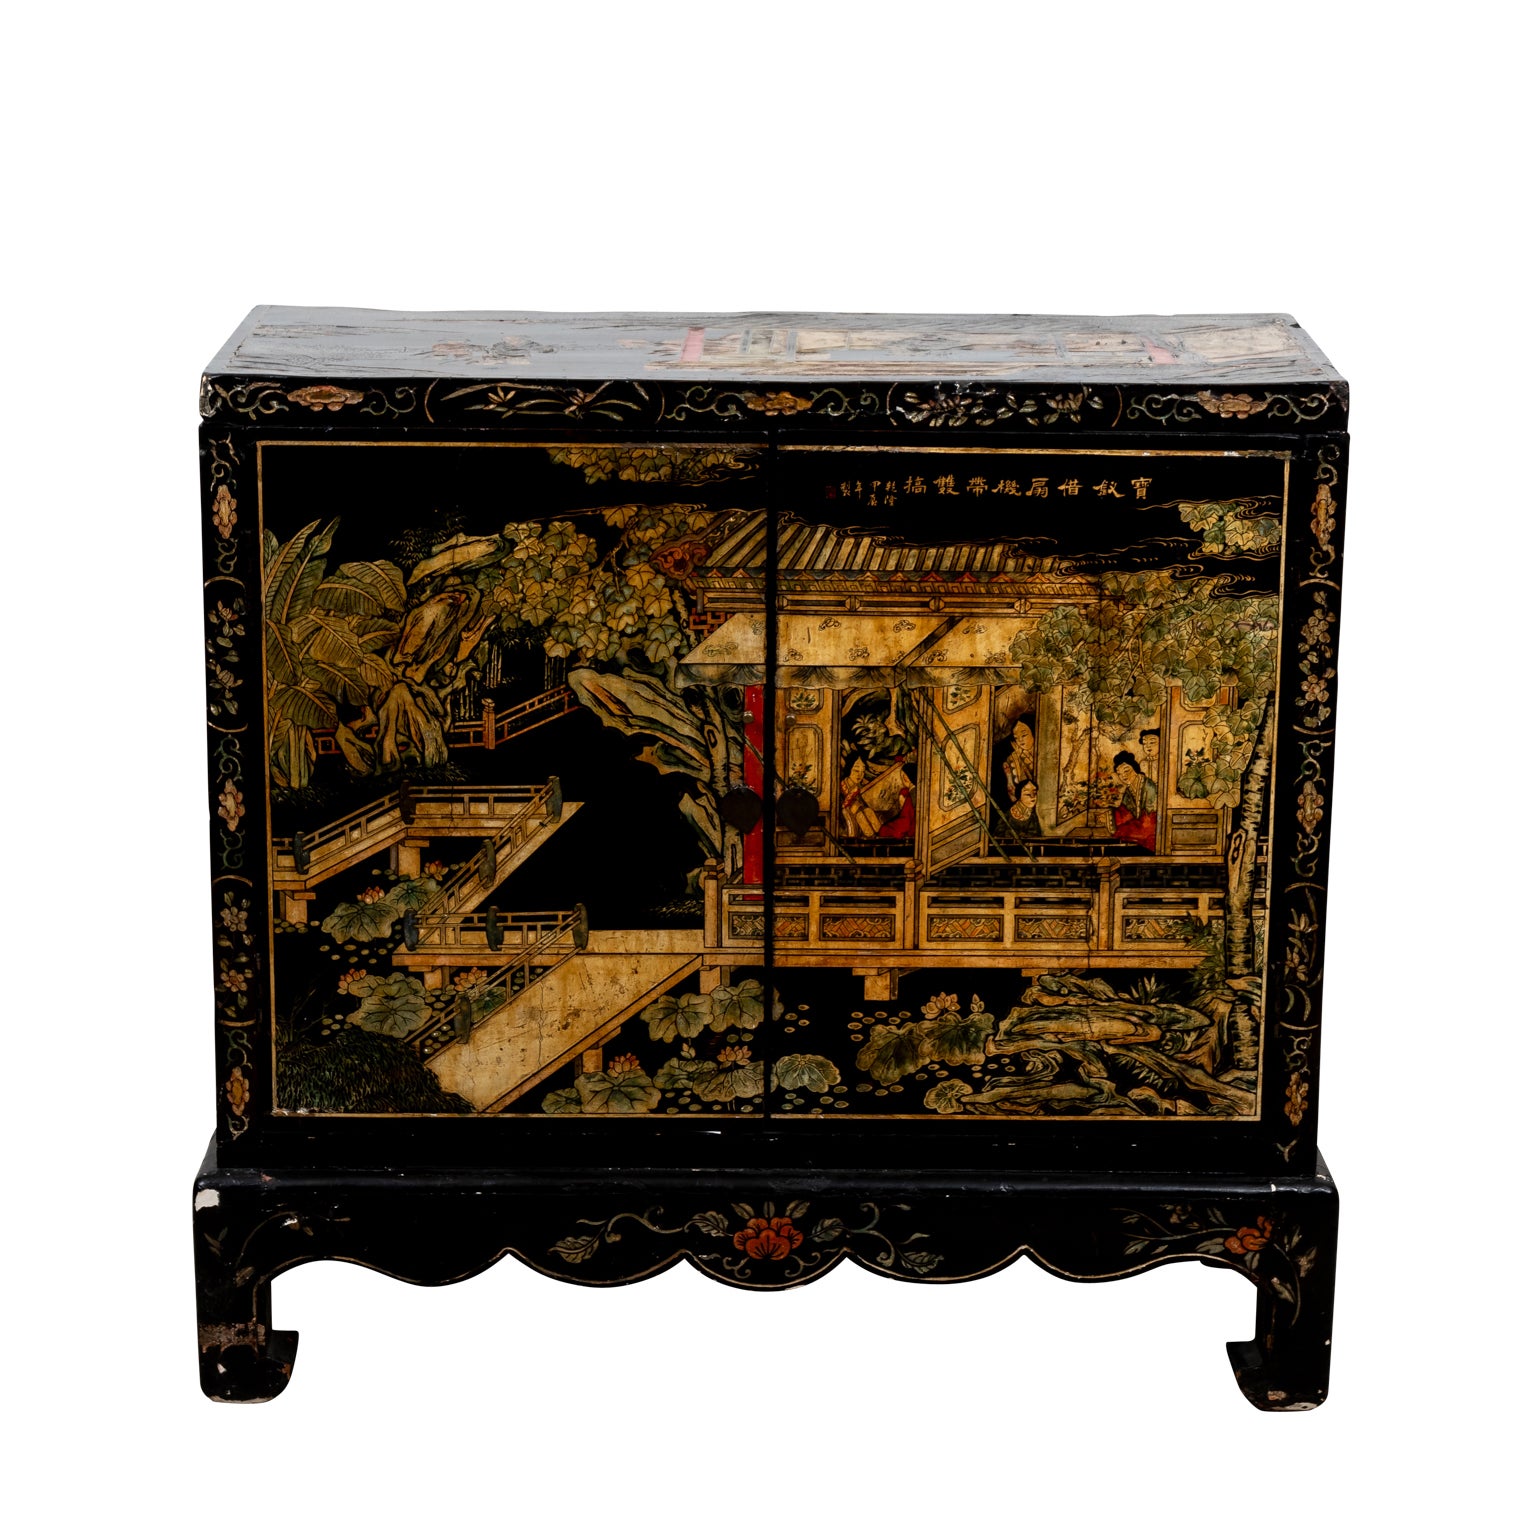 Midcentury carved chinoiserie cabinet, USA, 1950s.
  